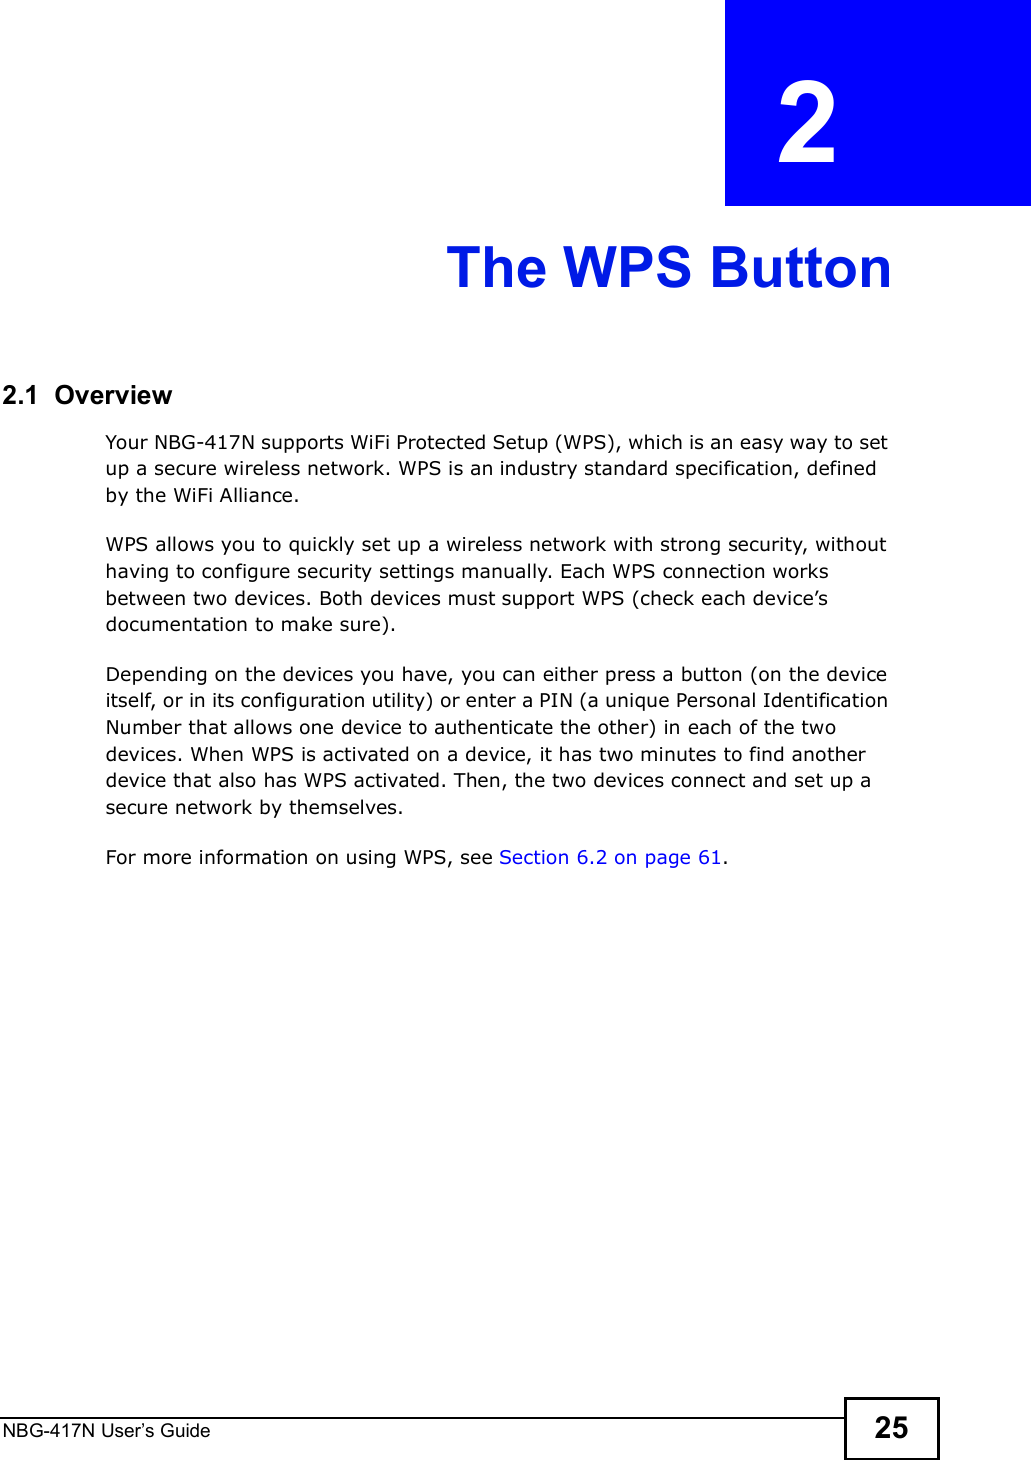 NBG-417N User s Guide 25CHAPTER  2 The WPS Button2.1  OverviewYour NBG-417N supports WiFi Protected Setup (WPS), which is an easy way to set up a secure wireless network. WPS is an industry standard specification, defined by the WiFi Alliance.WPS allows you to quickly set up a wireless network with strong security, without having to configure security settings manually. Each WPS connection works between two devices. Both devices must support WPS (check each device!s documentation to make sure). Depending on the devices you have, you can either press a button (on the device itself, or in its configuration utility) or enter a PIN (a unique Personal Identification Number that allows one device to authenticate the other) in each of the two devices. When WPS is activated on a device, it has two minutes to find another device that also has WPS activated. Then, the two devices connect and set up a secure network by themselves.For more information on using WPS, see Section 6.2 on page 61.